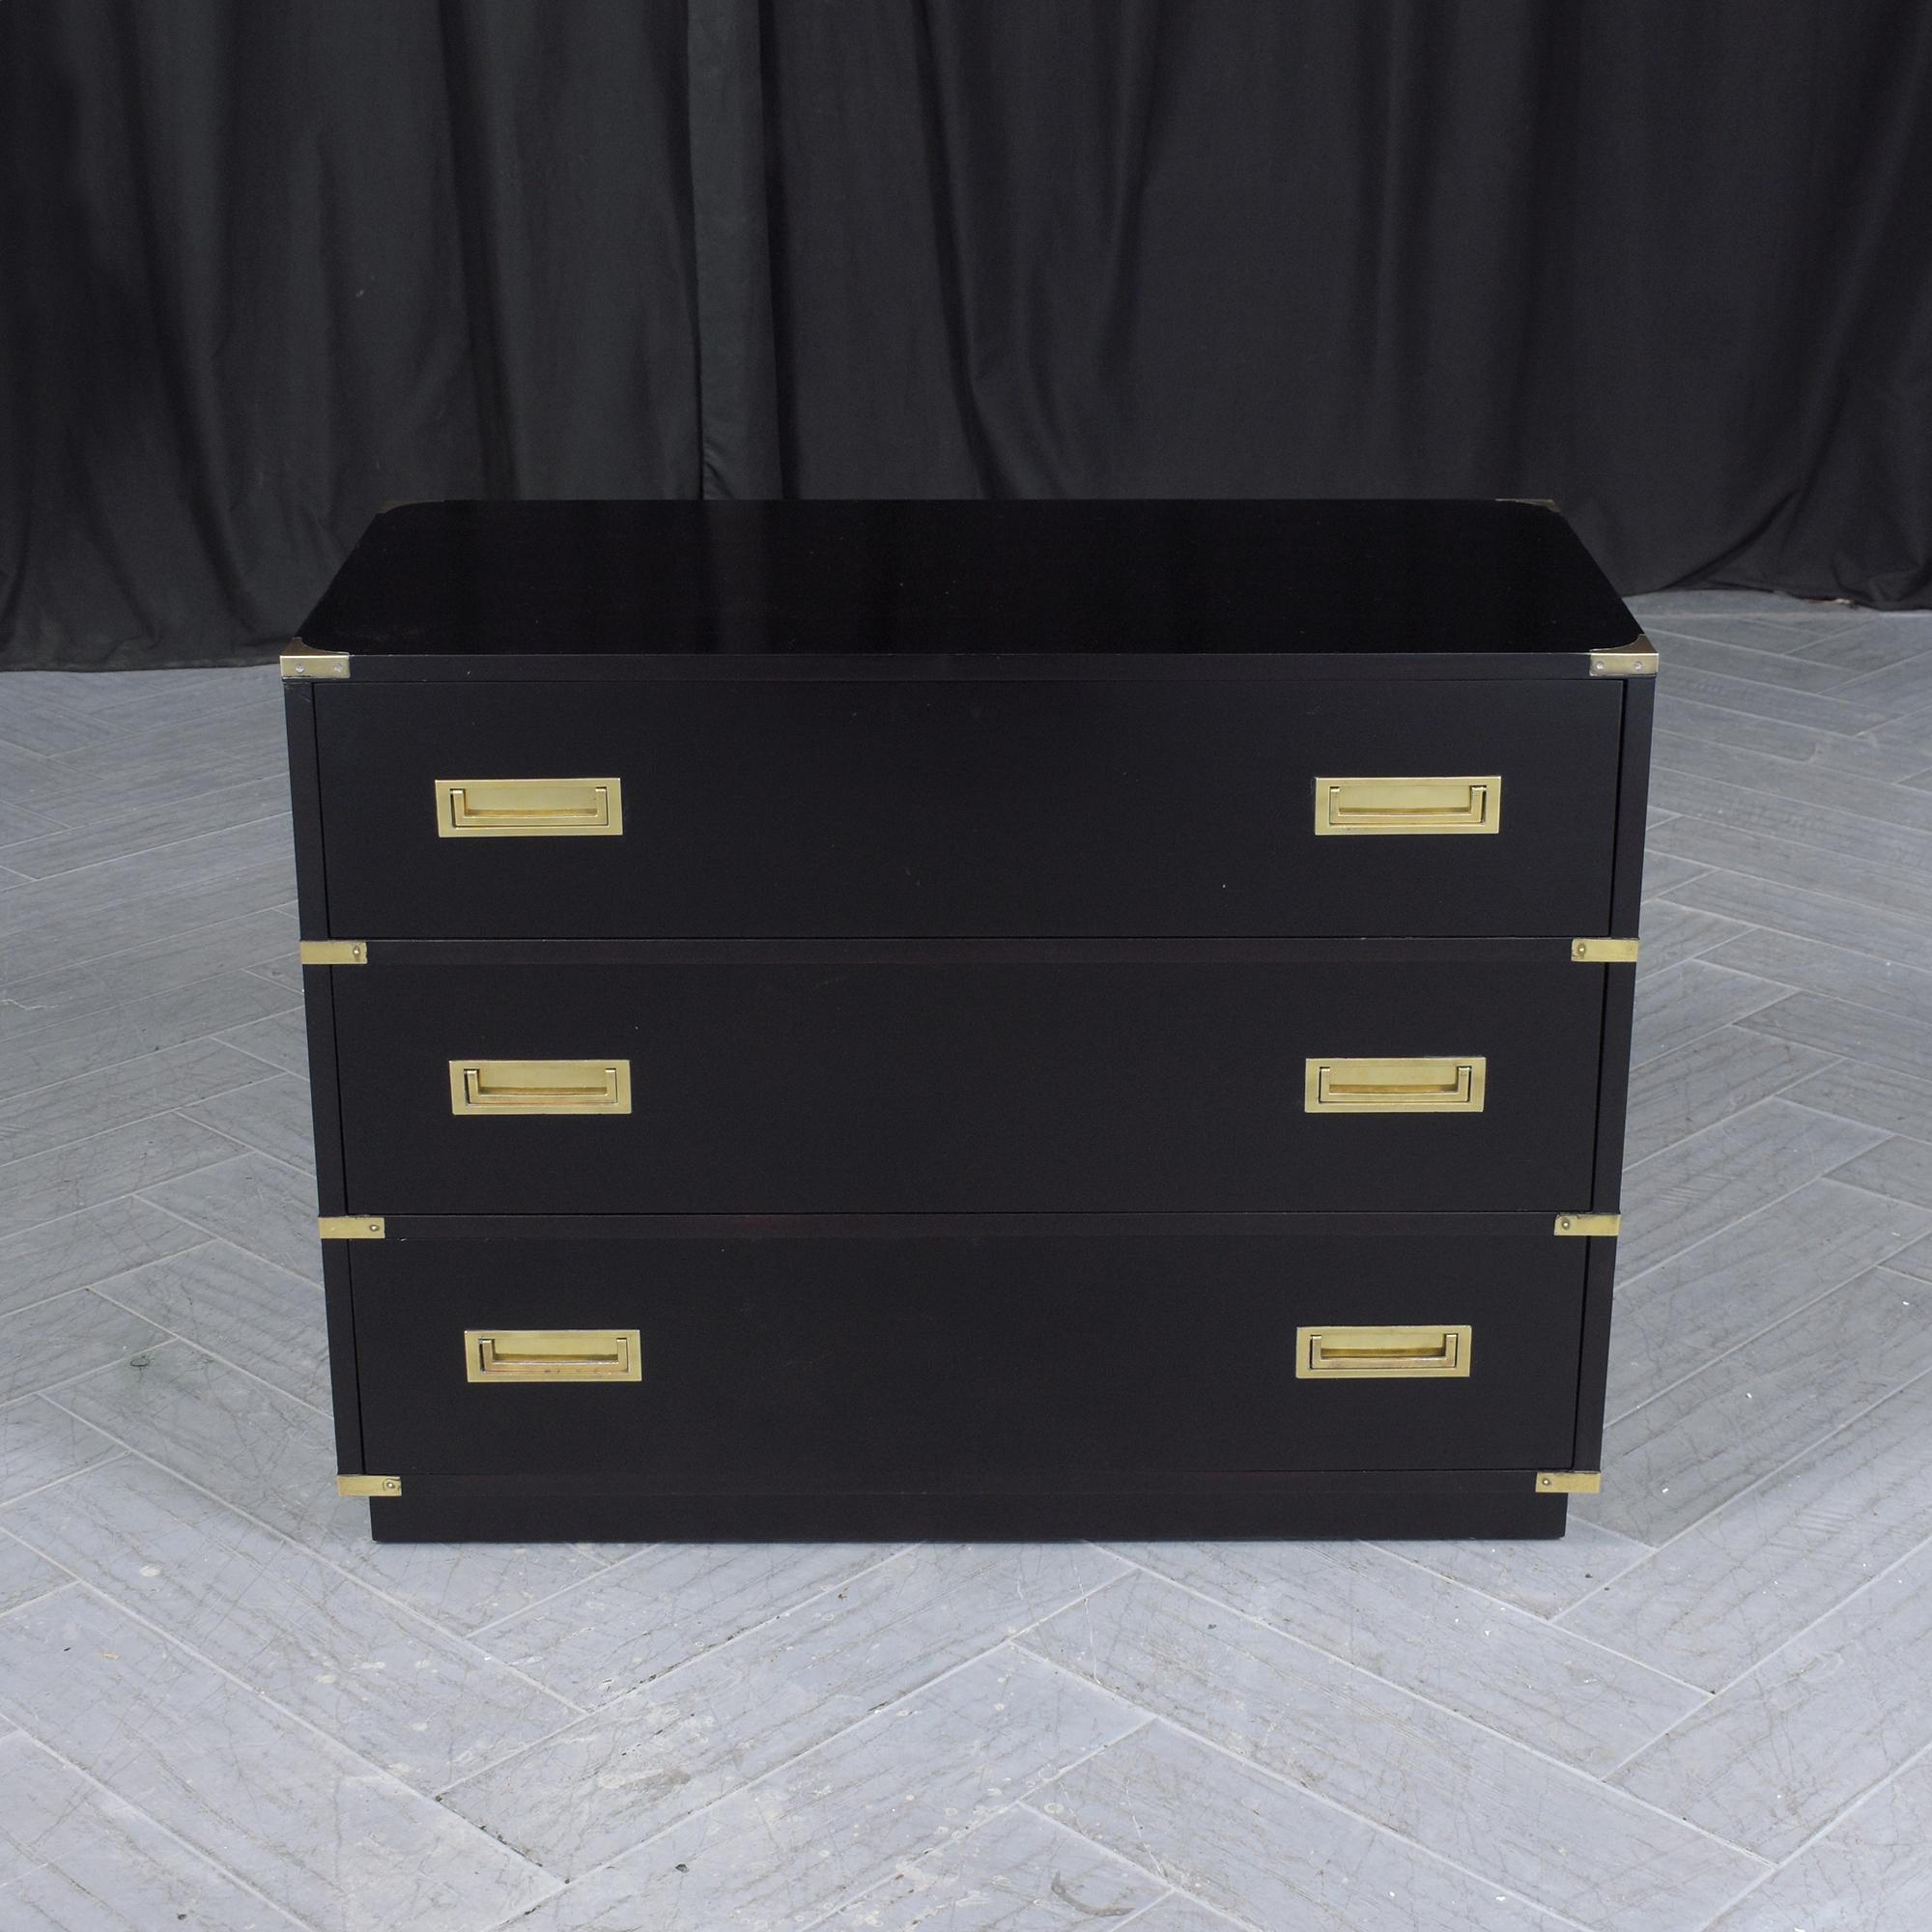 Showcasing our expertly restored Mid-Century Campaign Chest of Drawers, intricately handcrafted from the finest mahogany wood. This chest boasts a rich ebonized black lacquer finish, providing a striking contrast to its original gleaming brass